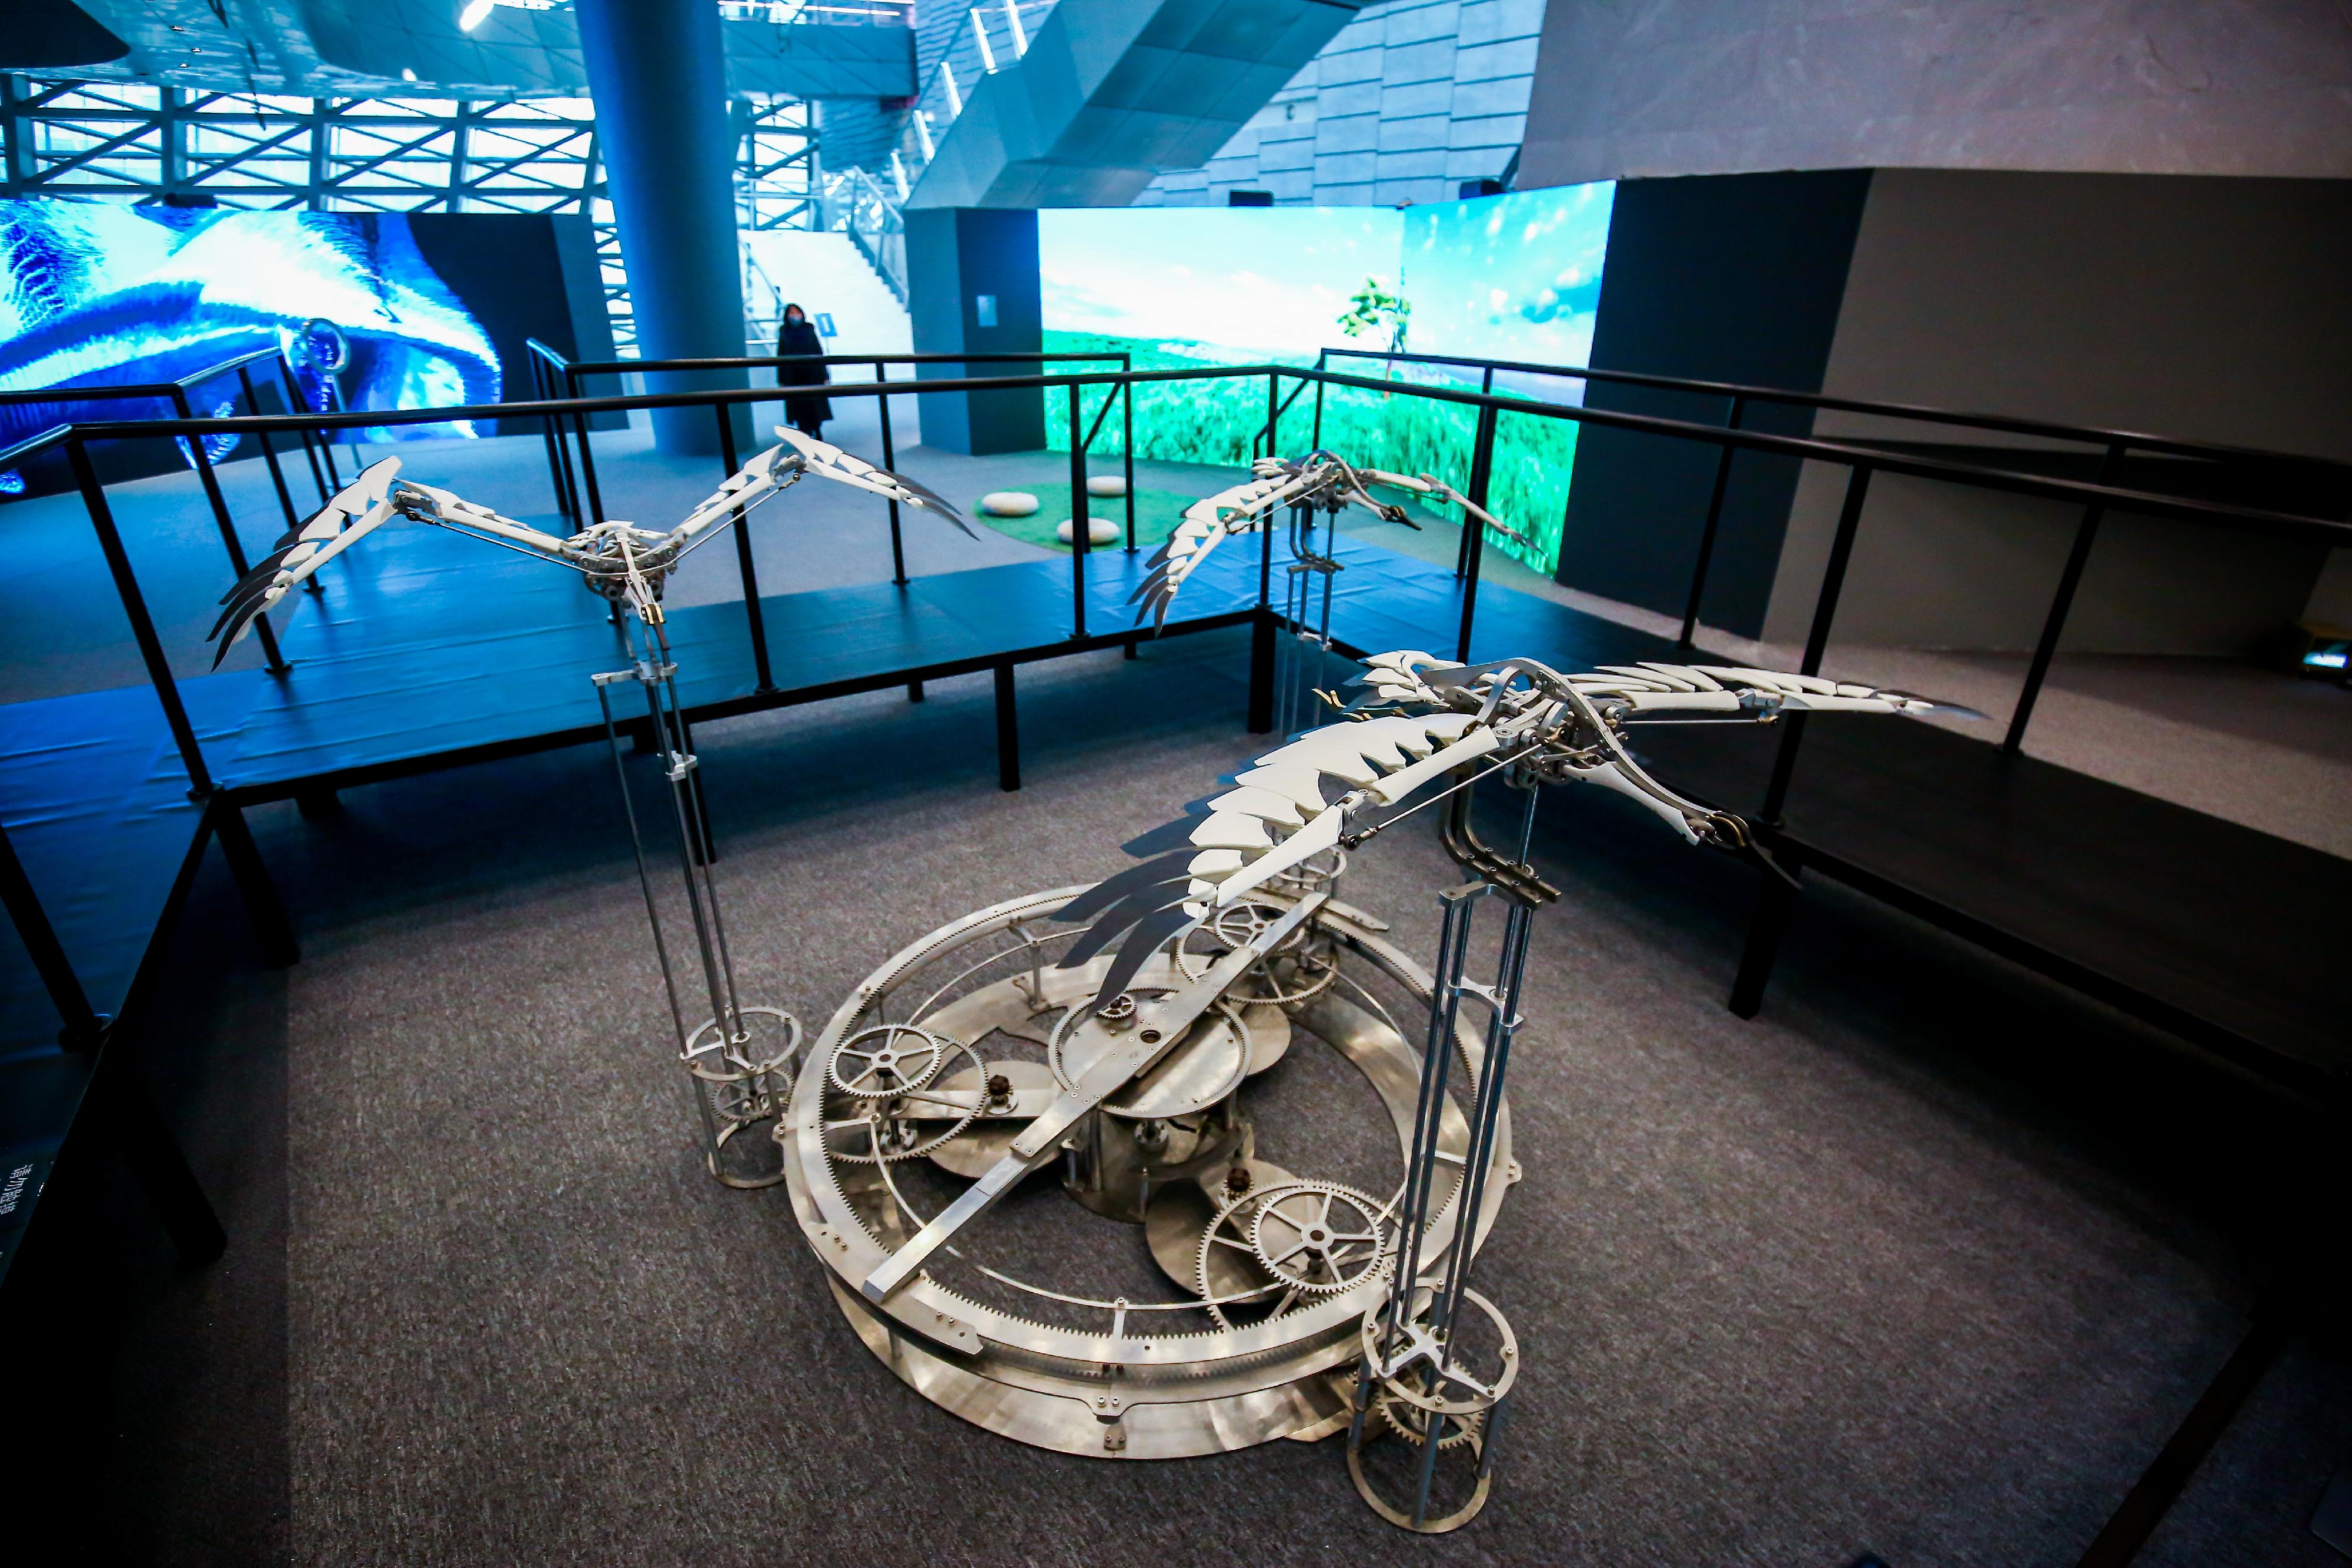 The Shenzhen stop of the "2022 Hong Kong-Macao Visual Art Biennale" is taking place at the Museum of Contemporary Art & Planning in Shenzhen. Photo shows Hong Kong artist Joseph Chan's kinetic installation, "Migratory birds", a large mechanical bird installation inspired by the ecology in nature.